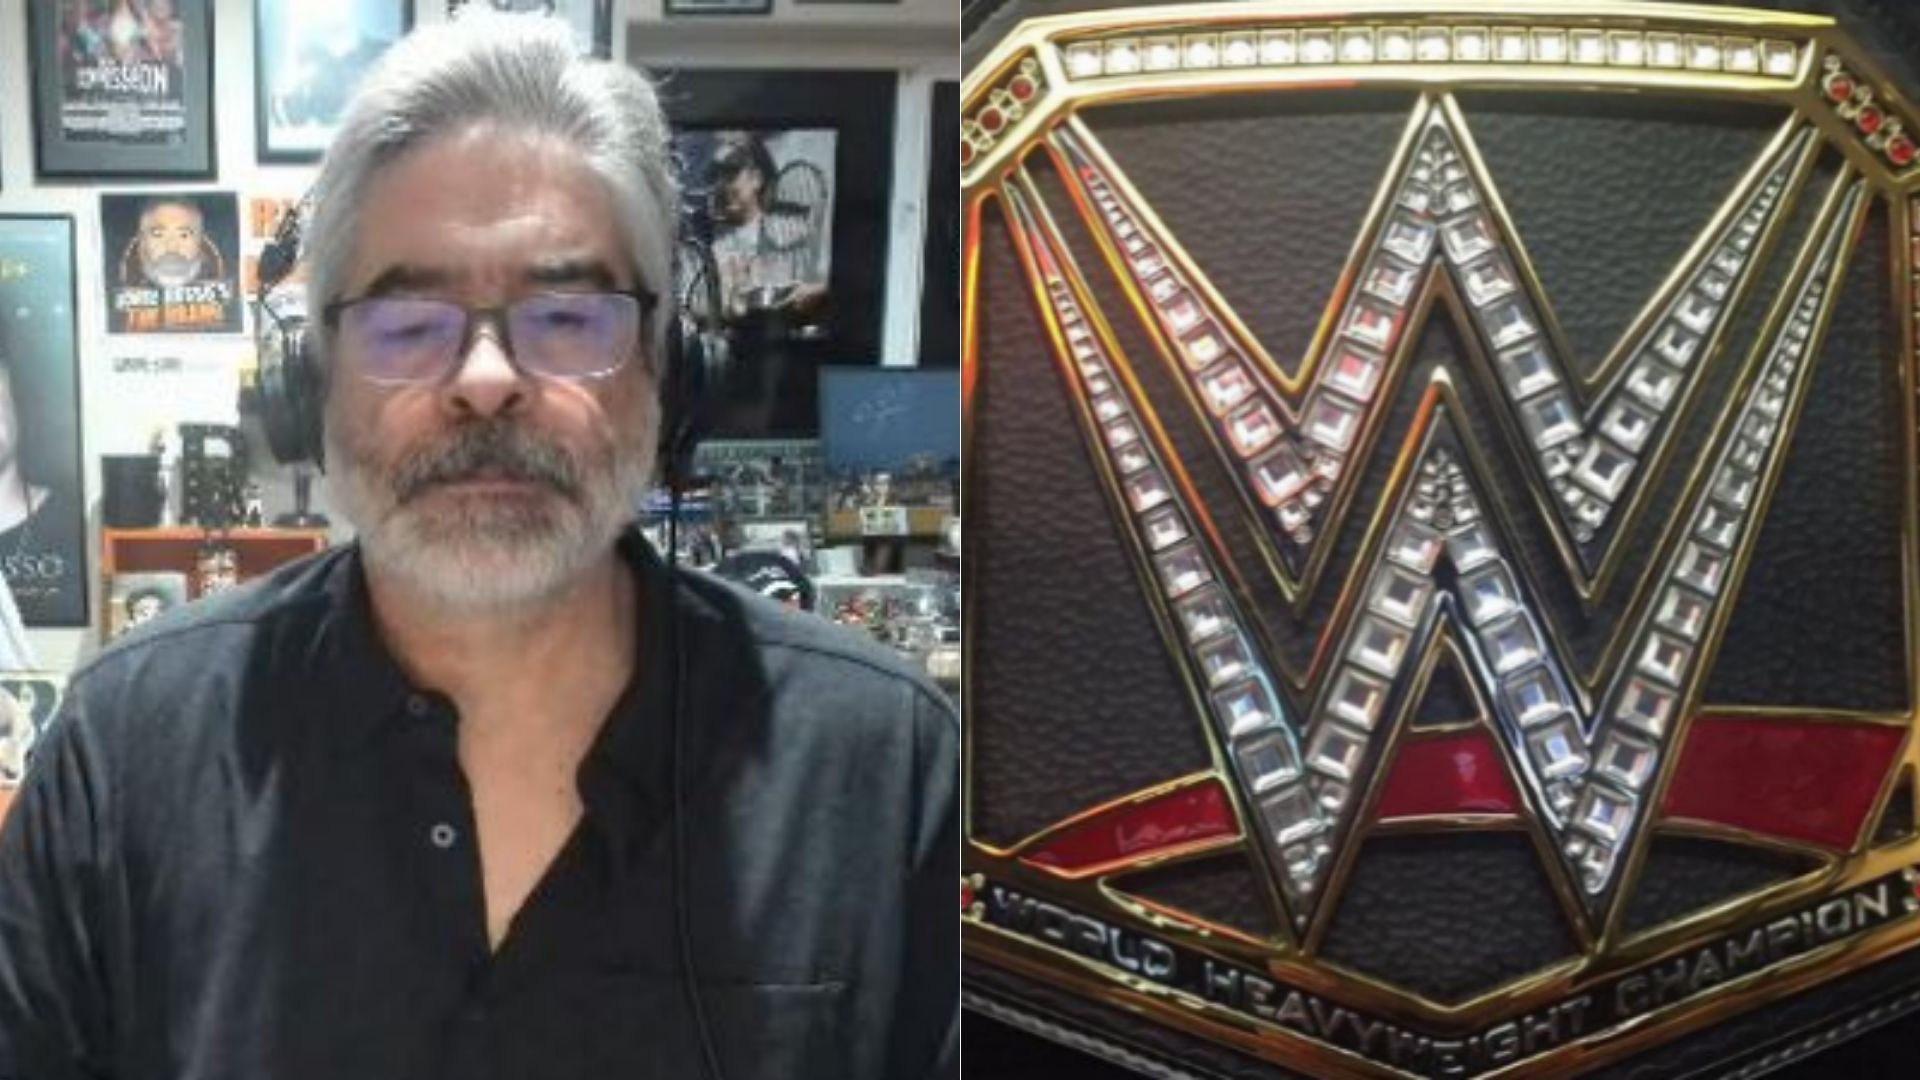 Vince Russo worked as a writer for WWE and WCW